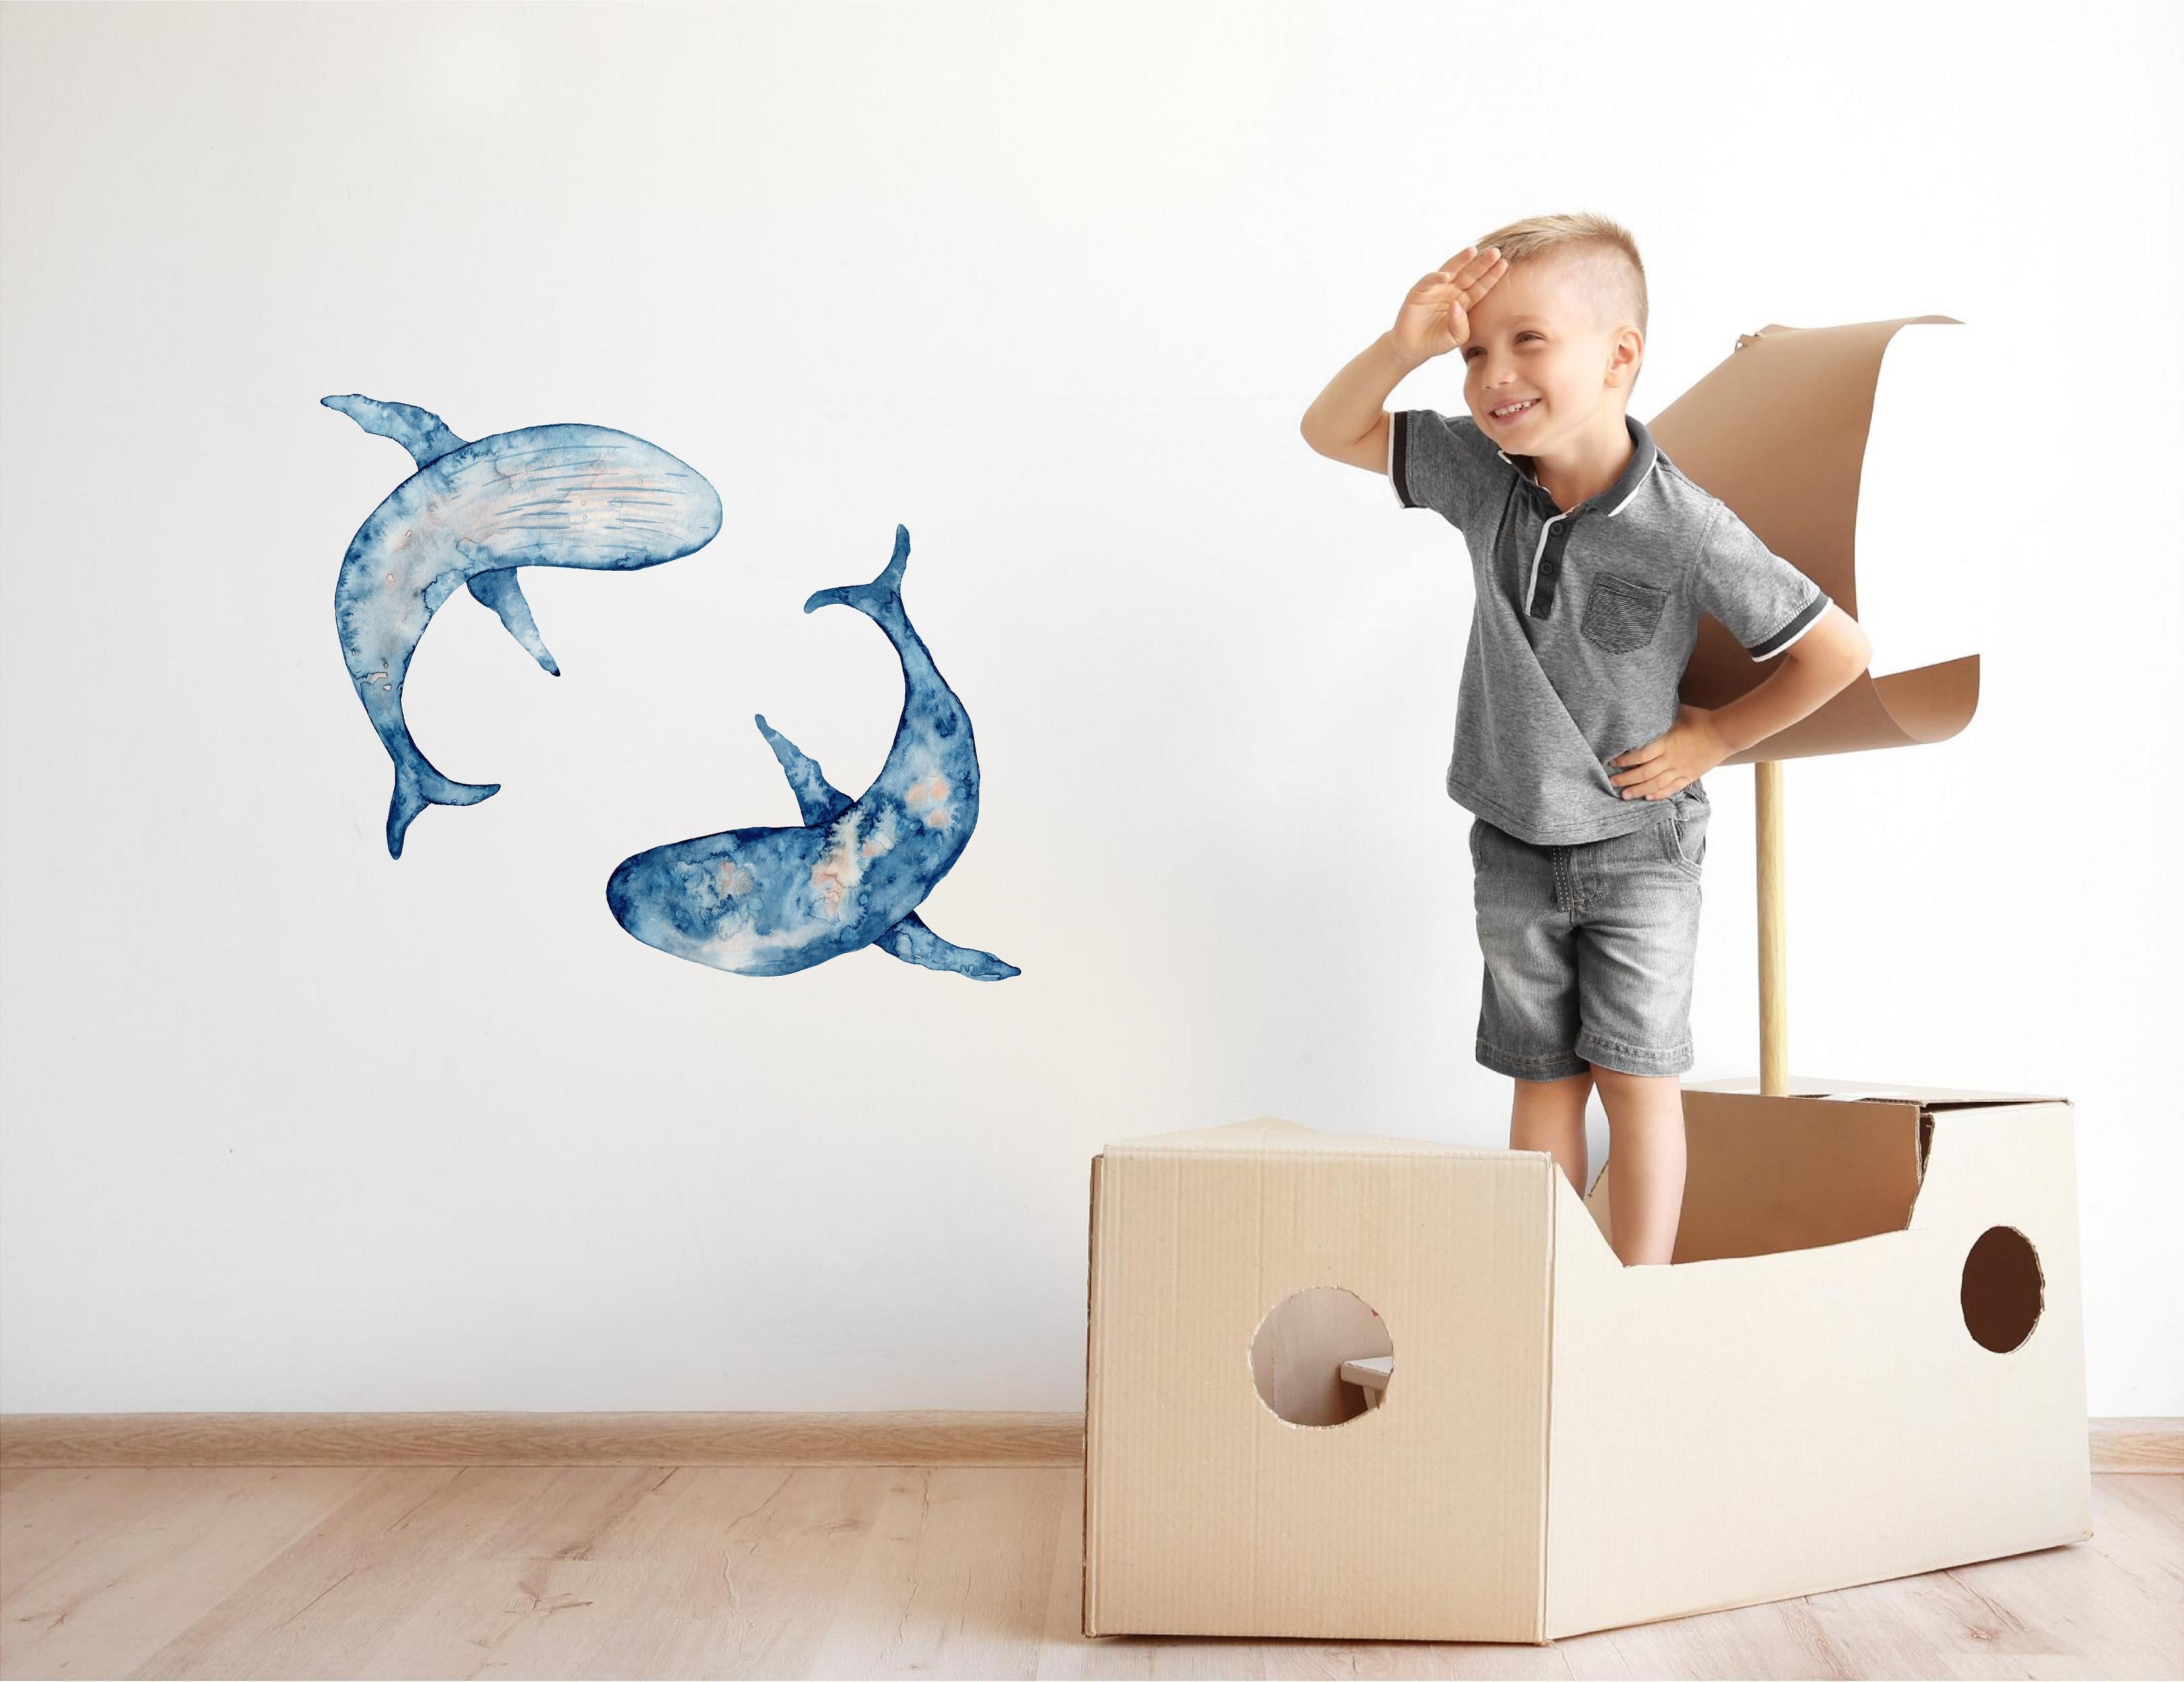 Watercolor Navy Blue Whales Wall Decal Set of 2 Sea Ocean Whale Wall Sticker | DecalBaby